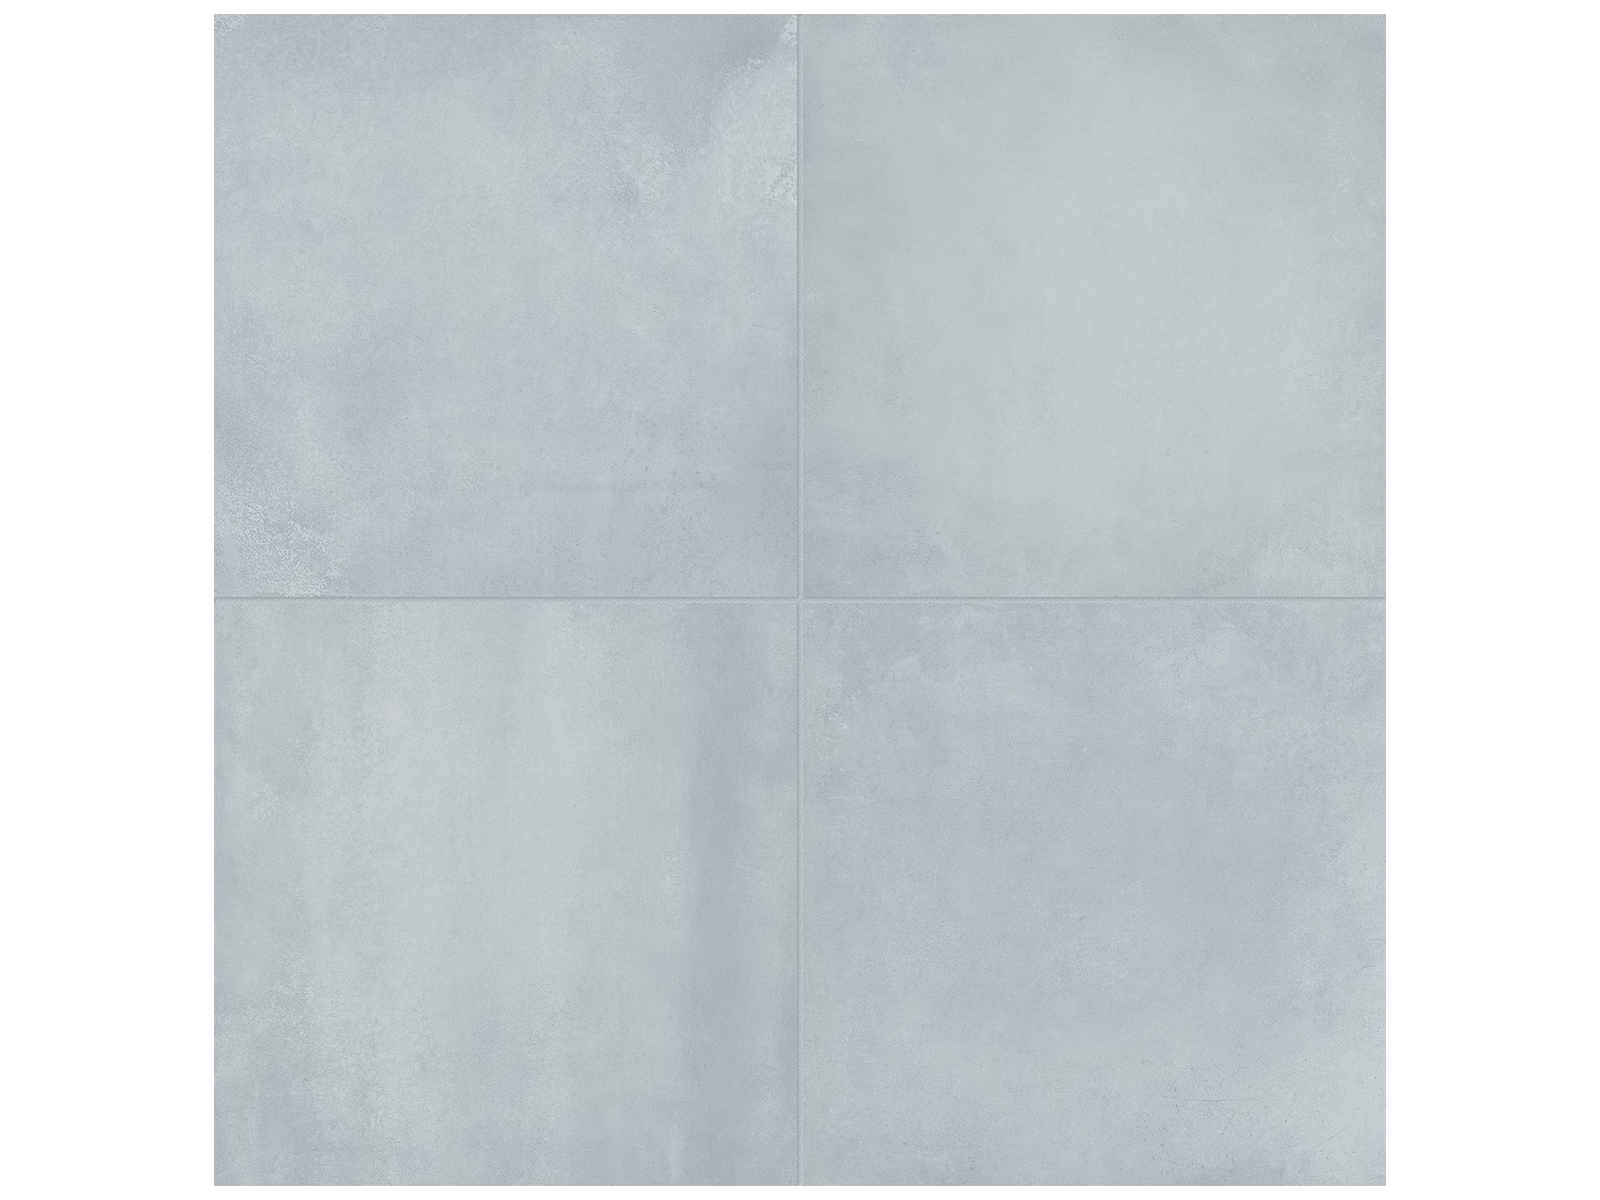 tide pattern glazed porcelain field tile from form anatolia collection distributed by surface group international matte finish pressed edge 8x8 square shape